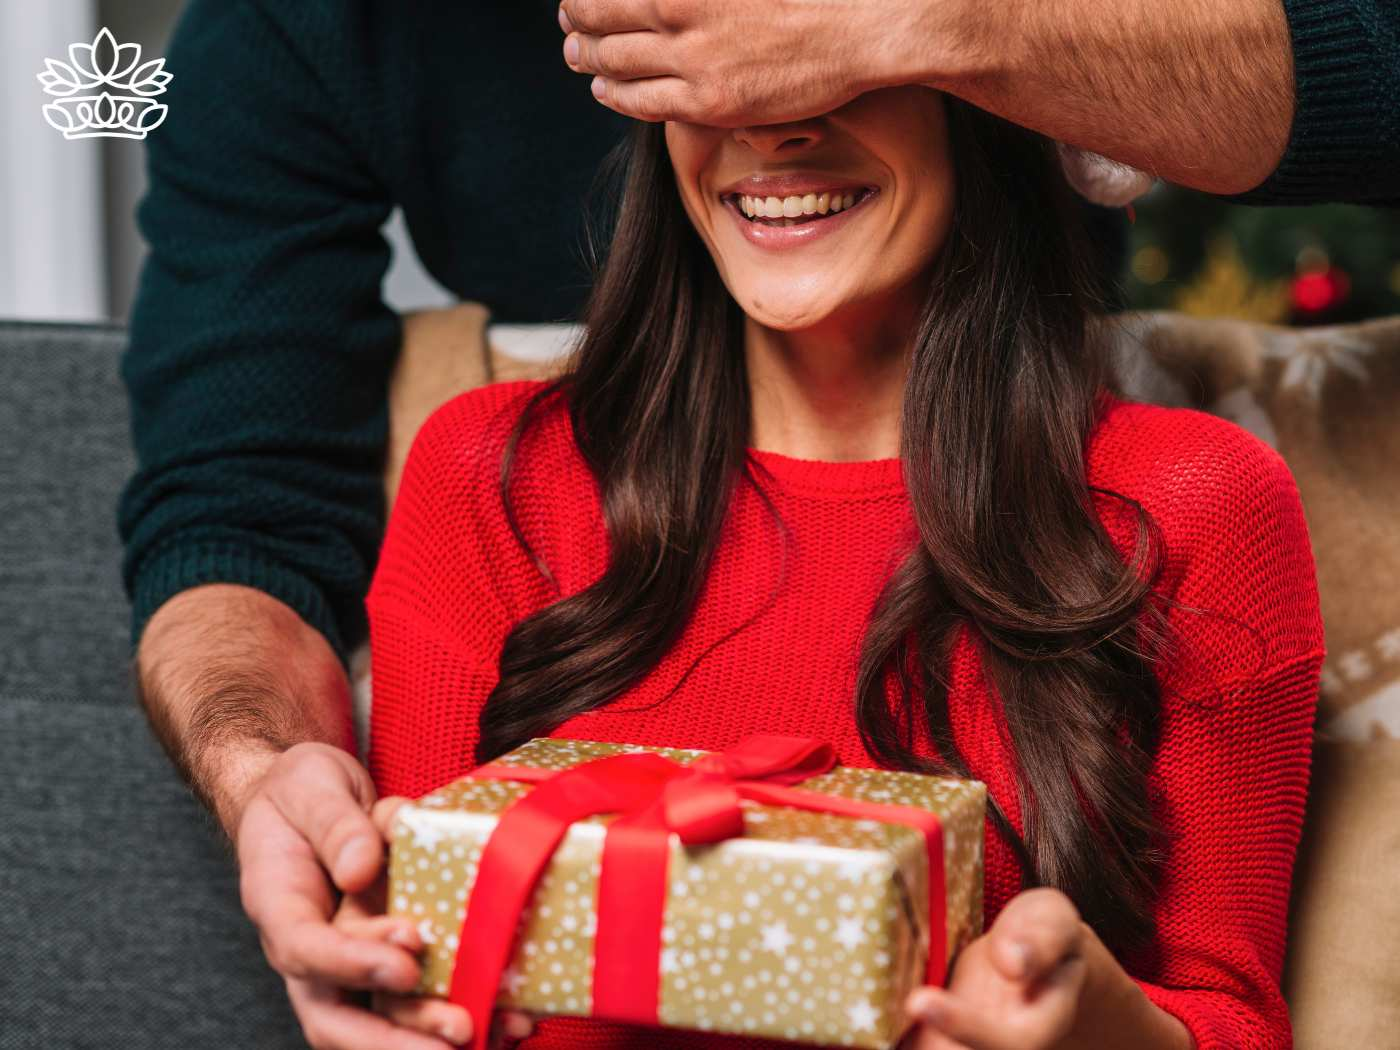 A woman in a red sweater being joyfully surprised with a gift box wrapped in festive paper, representing the Gift Boxes for Her Collection - Nationwide delivery with gift ideas - Fabulous Flowers and Gifts